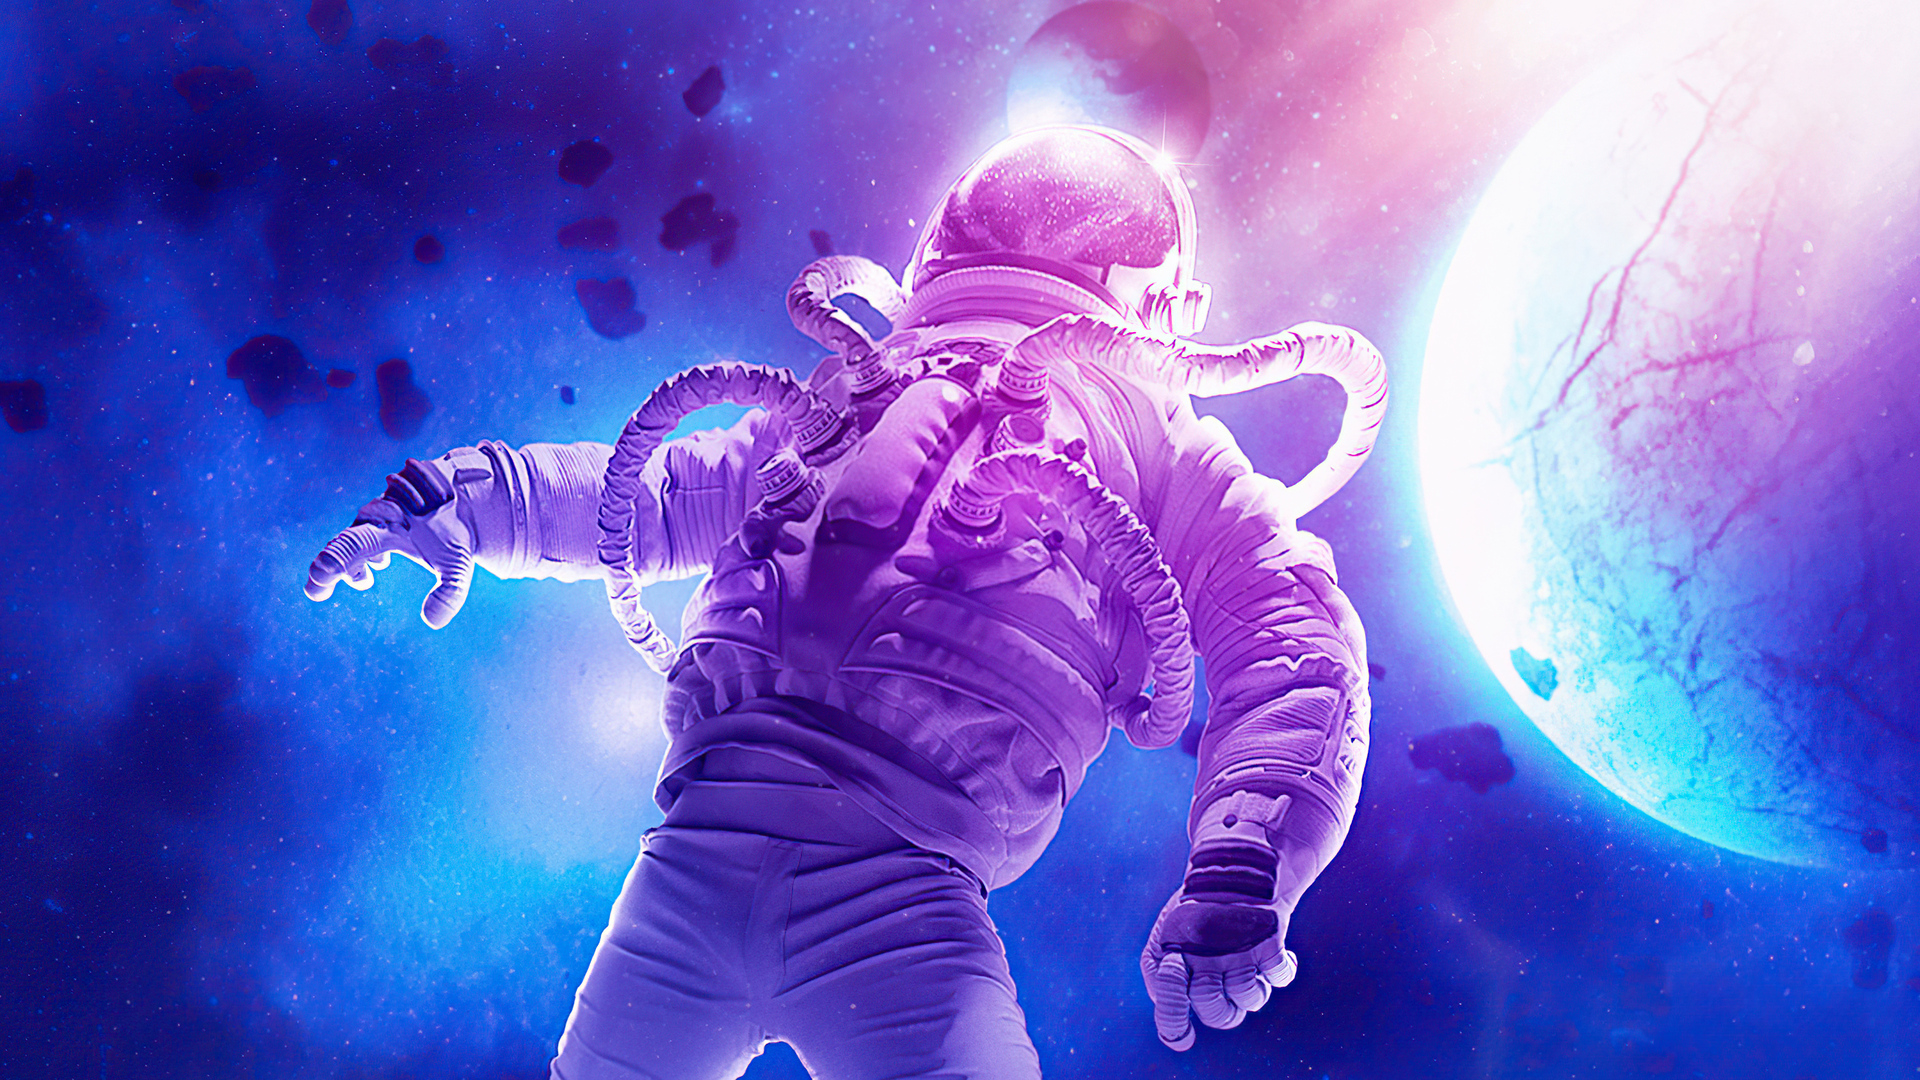 1920x1080 Astronaut In Another Universe 4k Laptop Full HD 1080P ,HD 4k